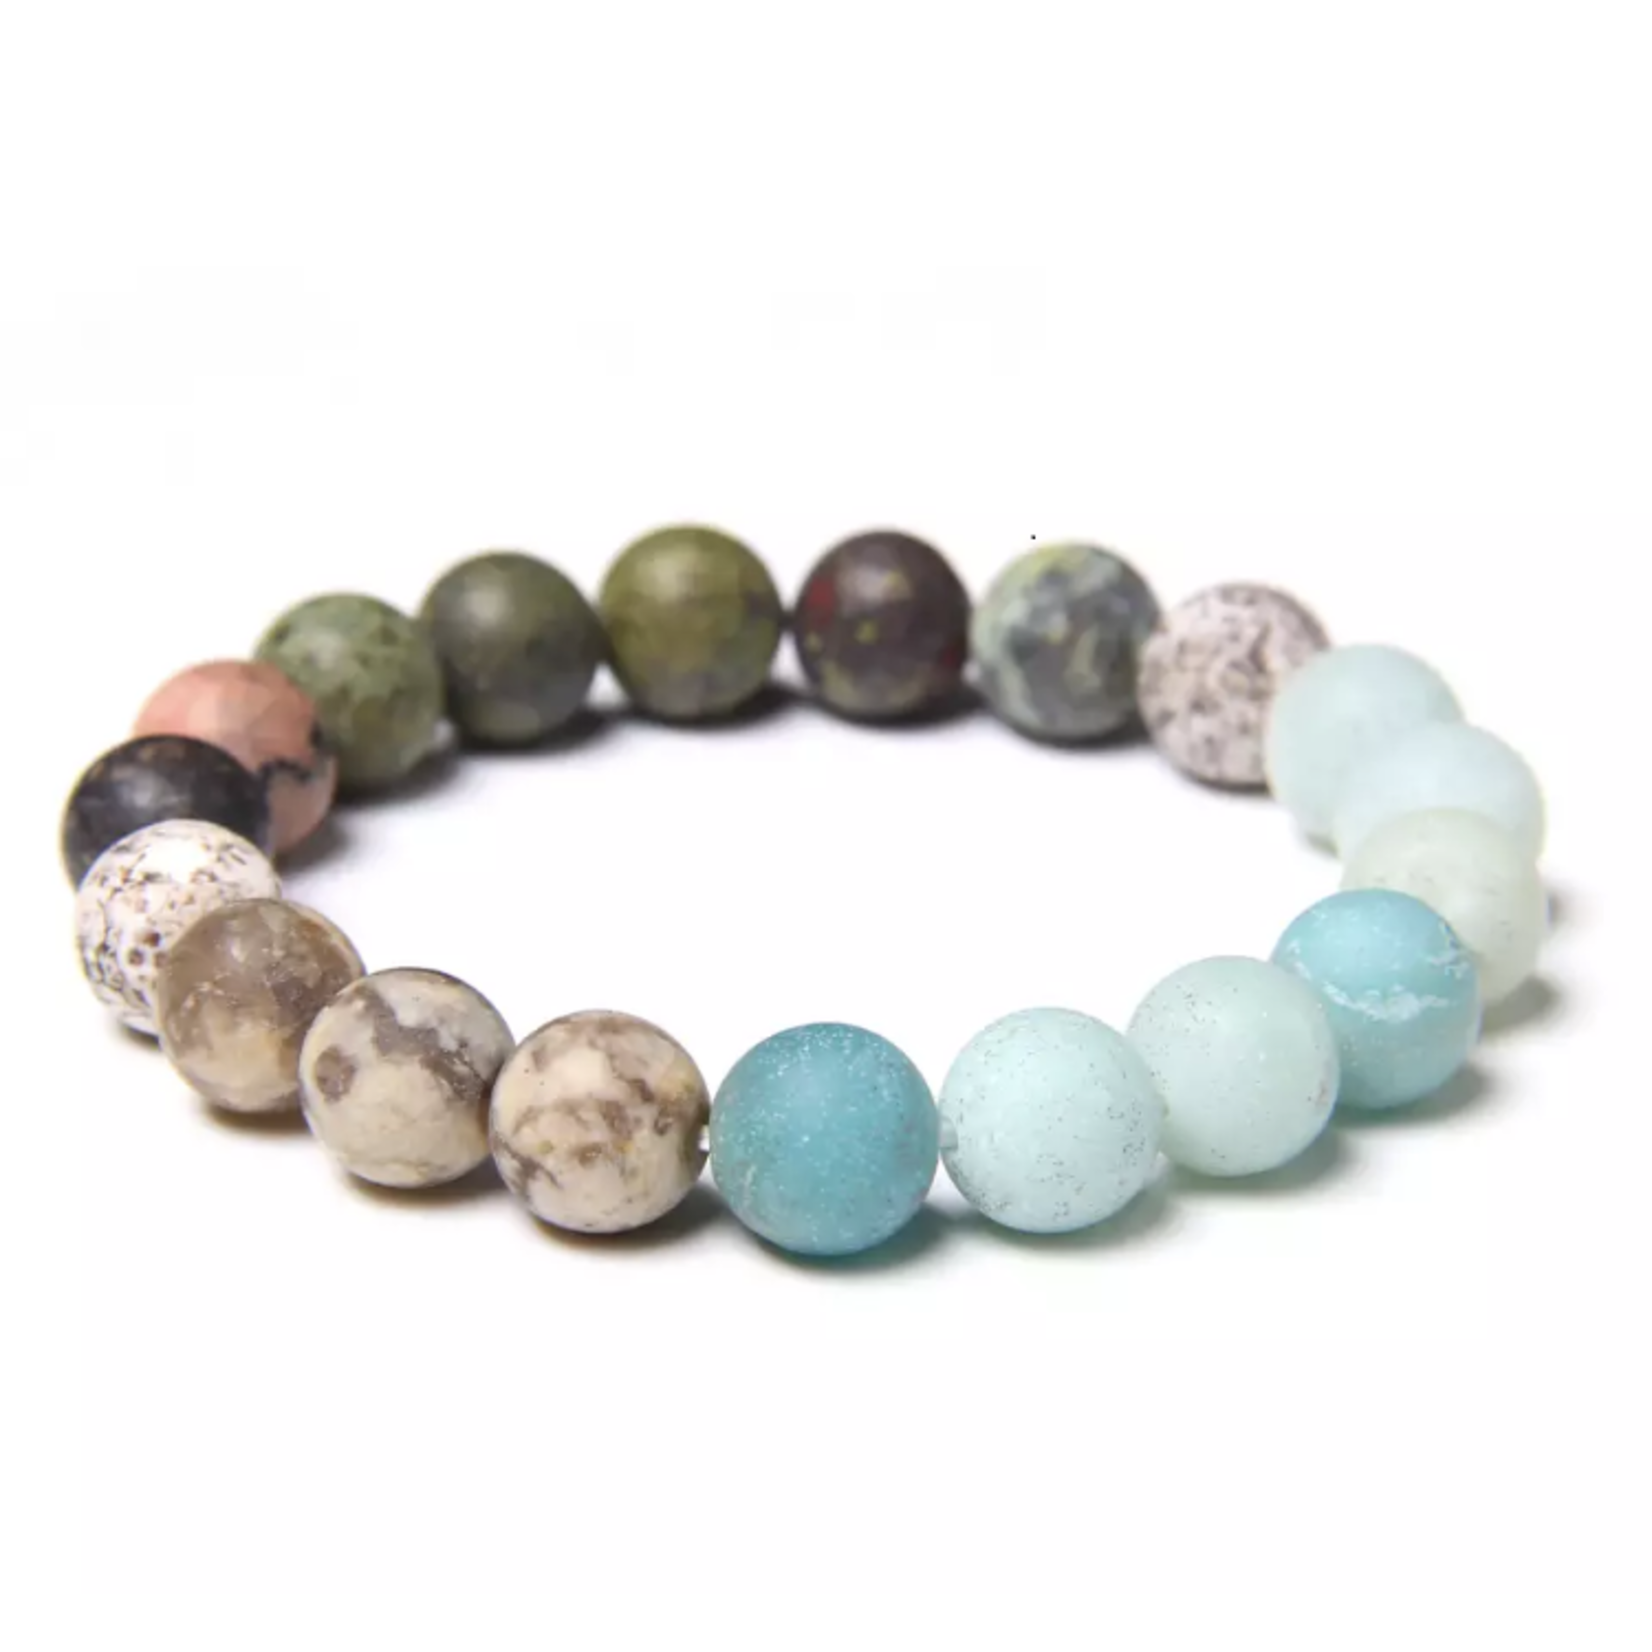 23cm Natural Stone Bracelets, 10mm - Matte and Refined